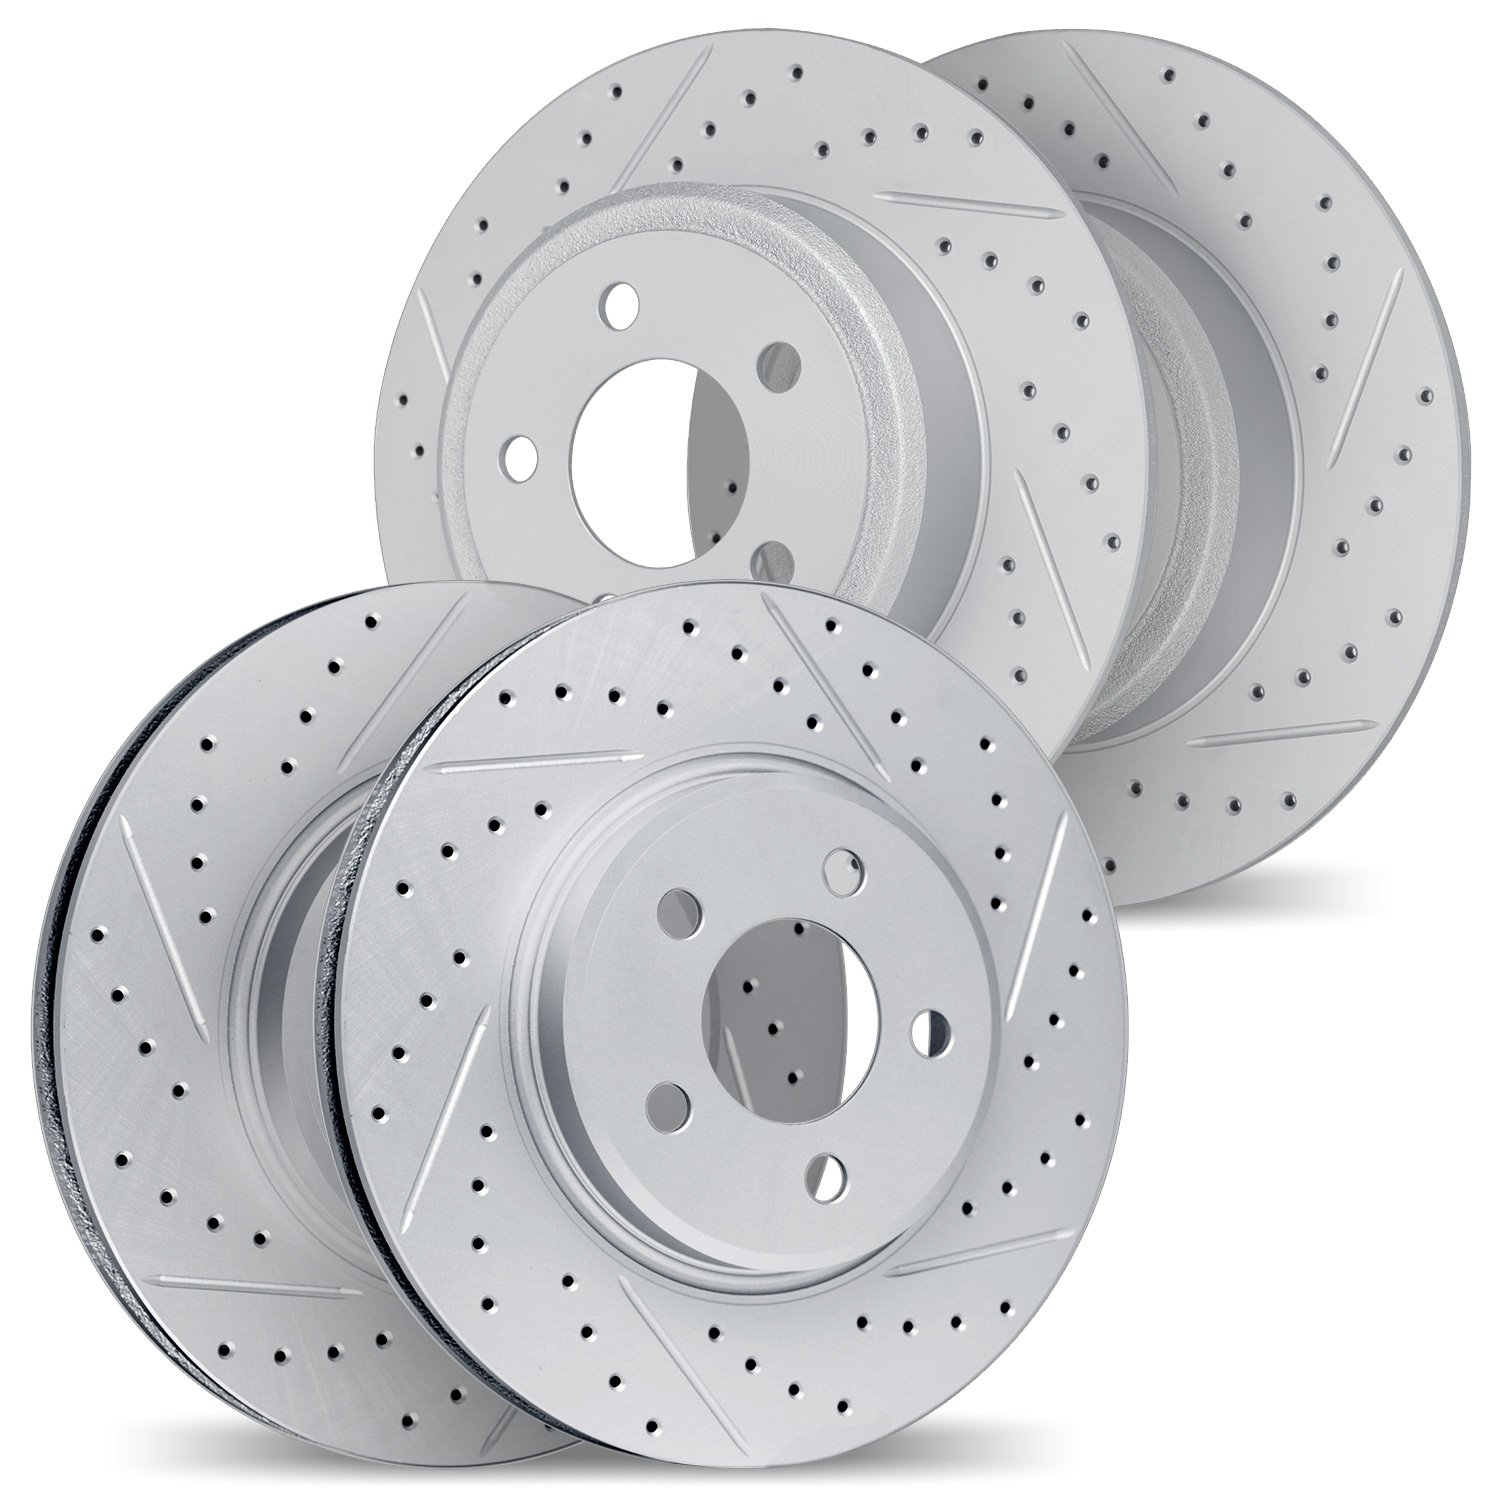 2004-73014 Geoperformance Drilled/Slotted Brake Rotors, 2005-2011 Audi/Volkswagen, Position: Front and Rear